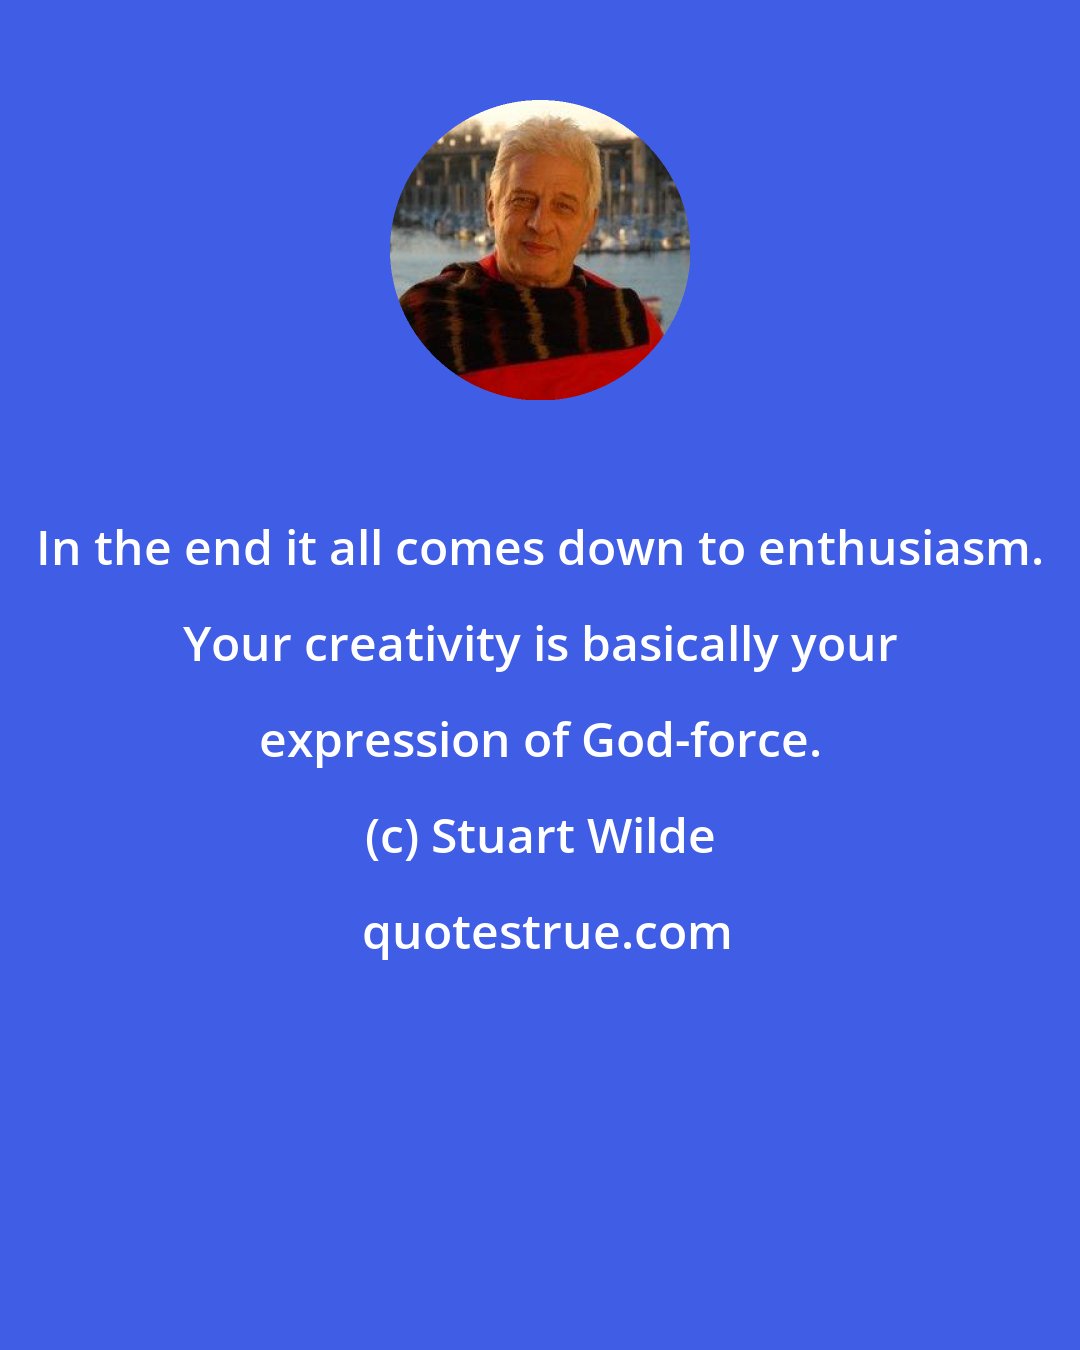 Stuart Wilde: In the end it all comes down to enthusiasm. Your creativity is basically your expression of God-force.